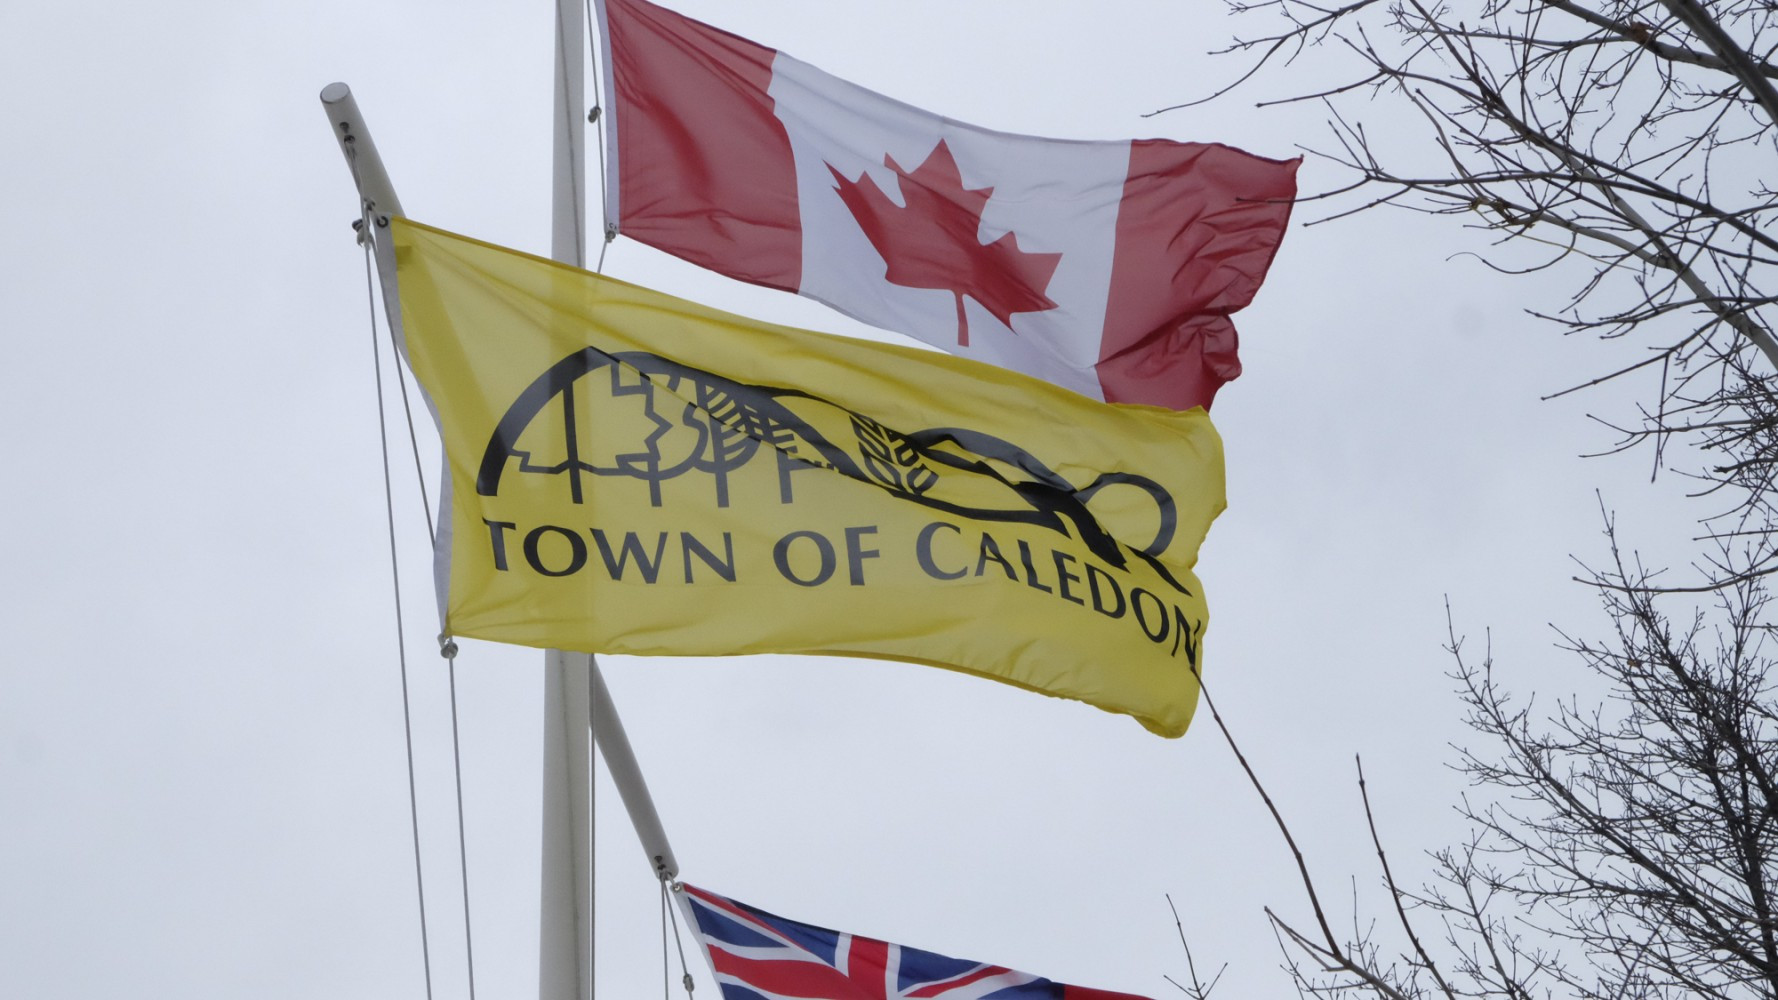 ‘I believe we are a little too late’: Caledon council votes to disavow actions of former mayor Thompson but refuses to request MZO be revoked